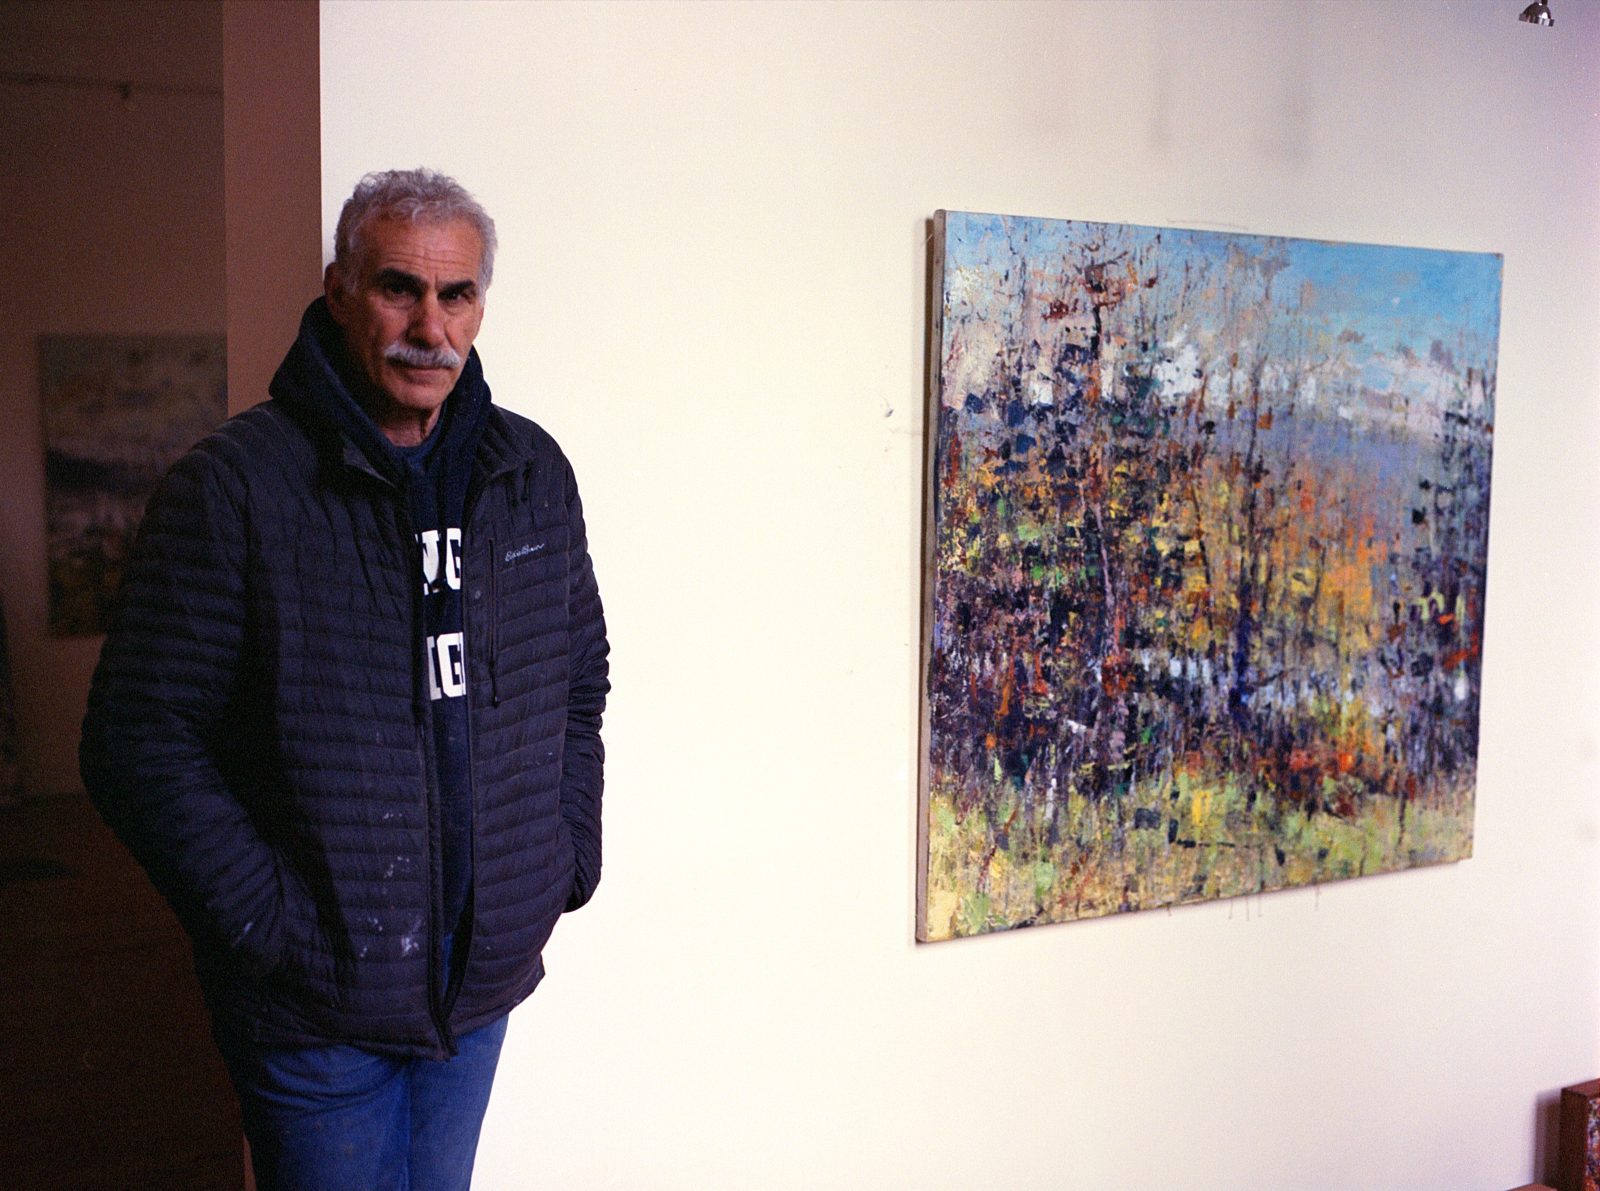 Mr. Chickillo stands next to one of his large oil paintings